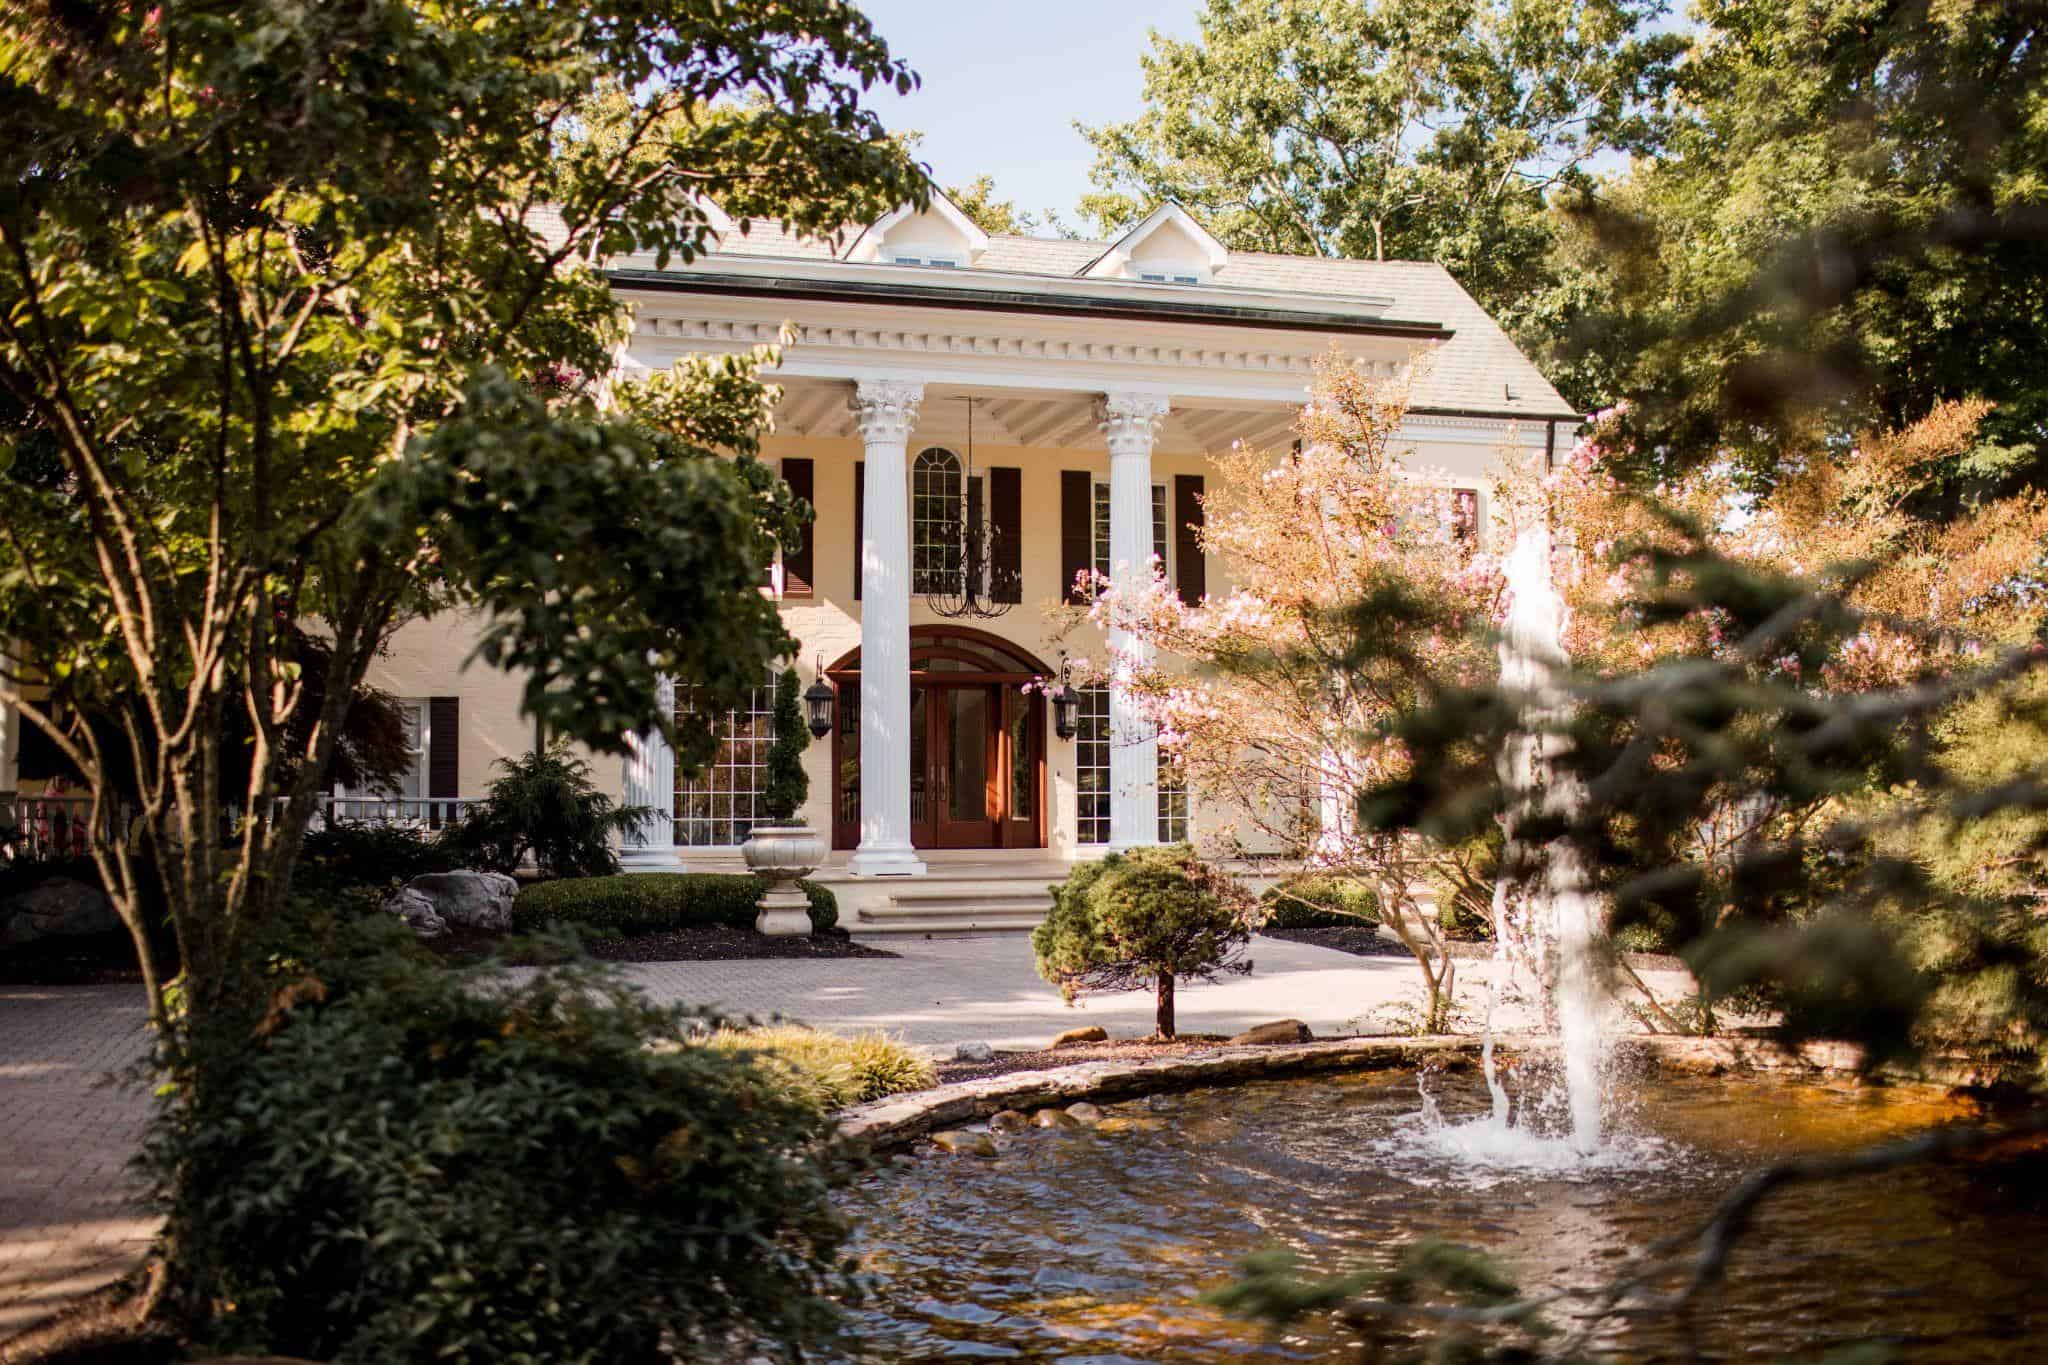 The Estate at Cherokee Dock photographed by John Myers photography is a premiere spot for destination weddings in Nashville.